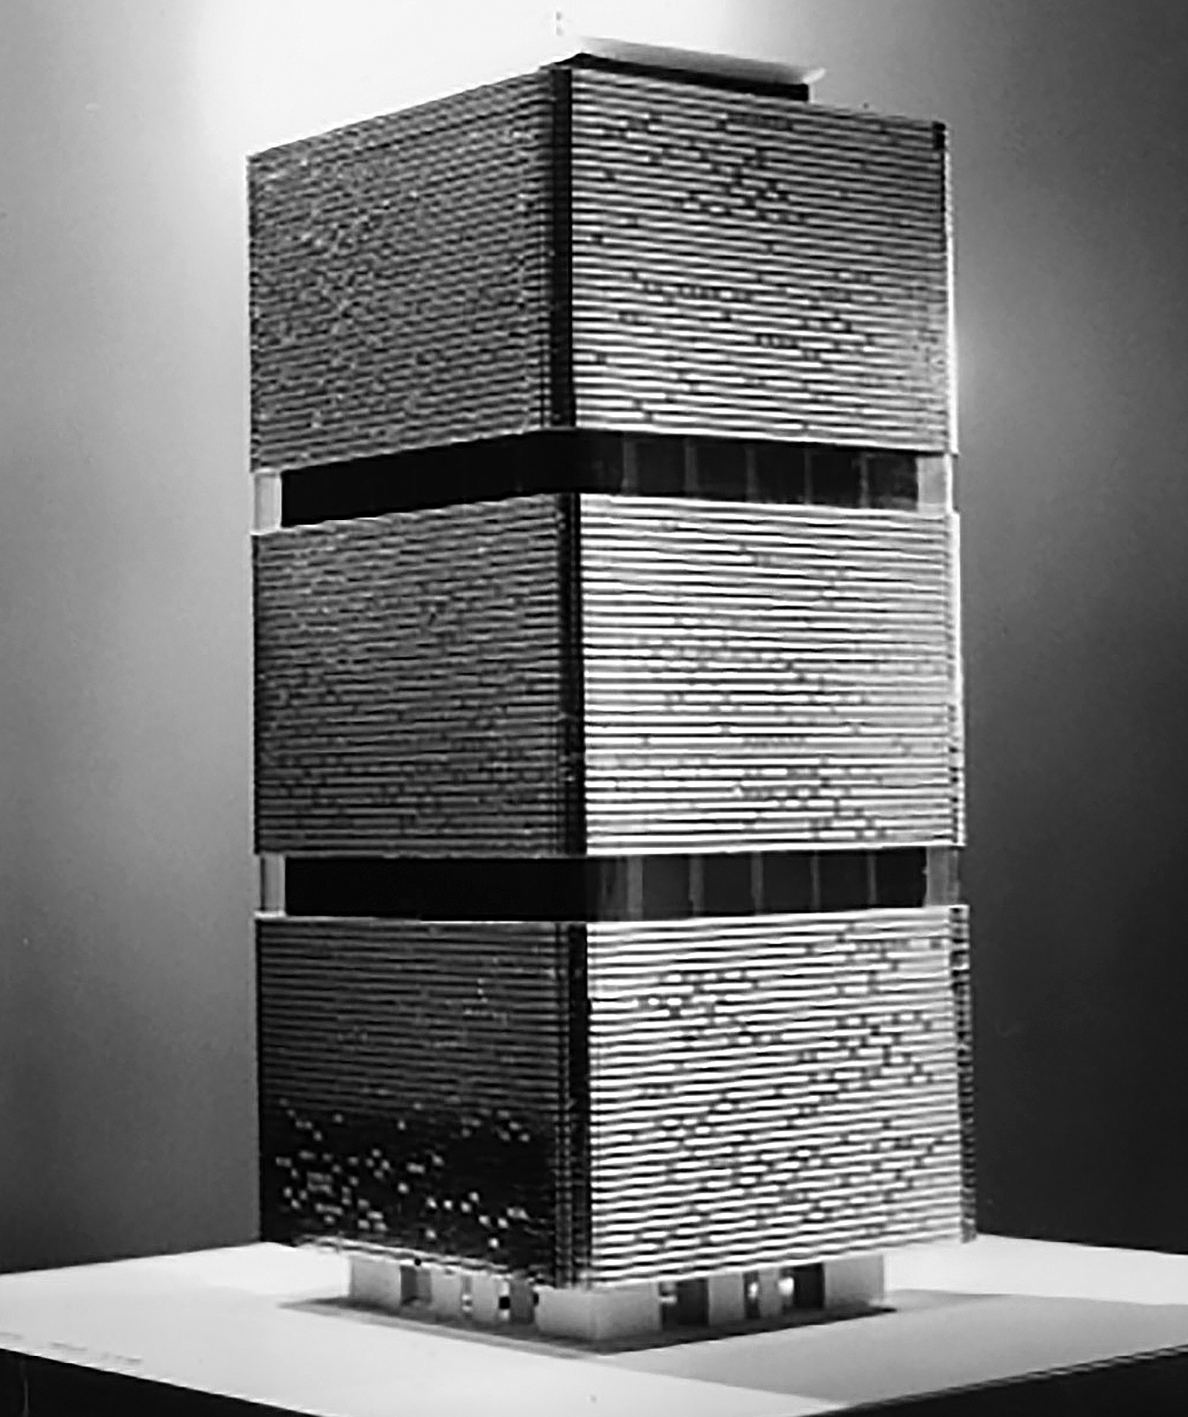 1st Prize for the competition for the offices of the Ministère de l’Éducation Nationale (with J. Belmont and J. Swetchine). Design not built, photo of the model.